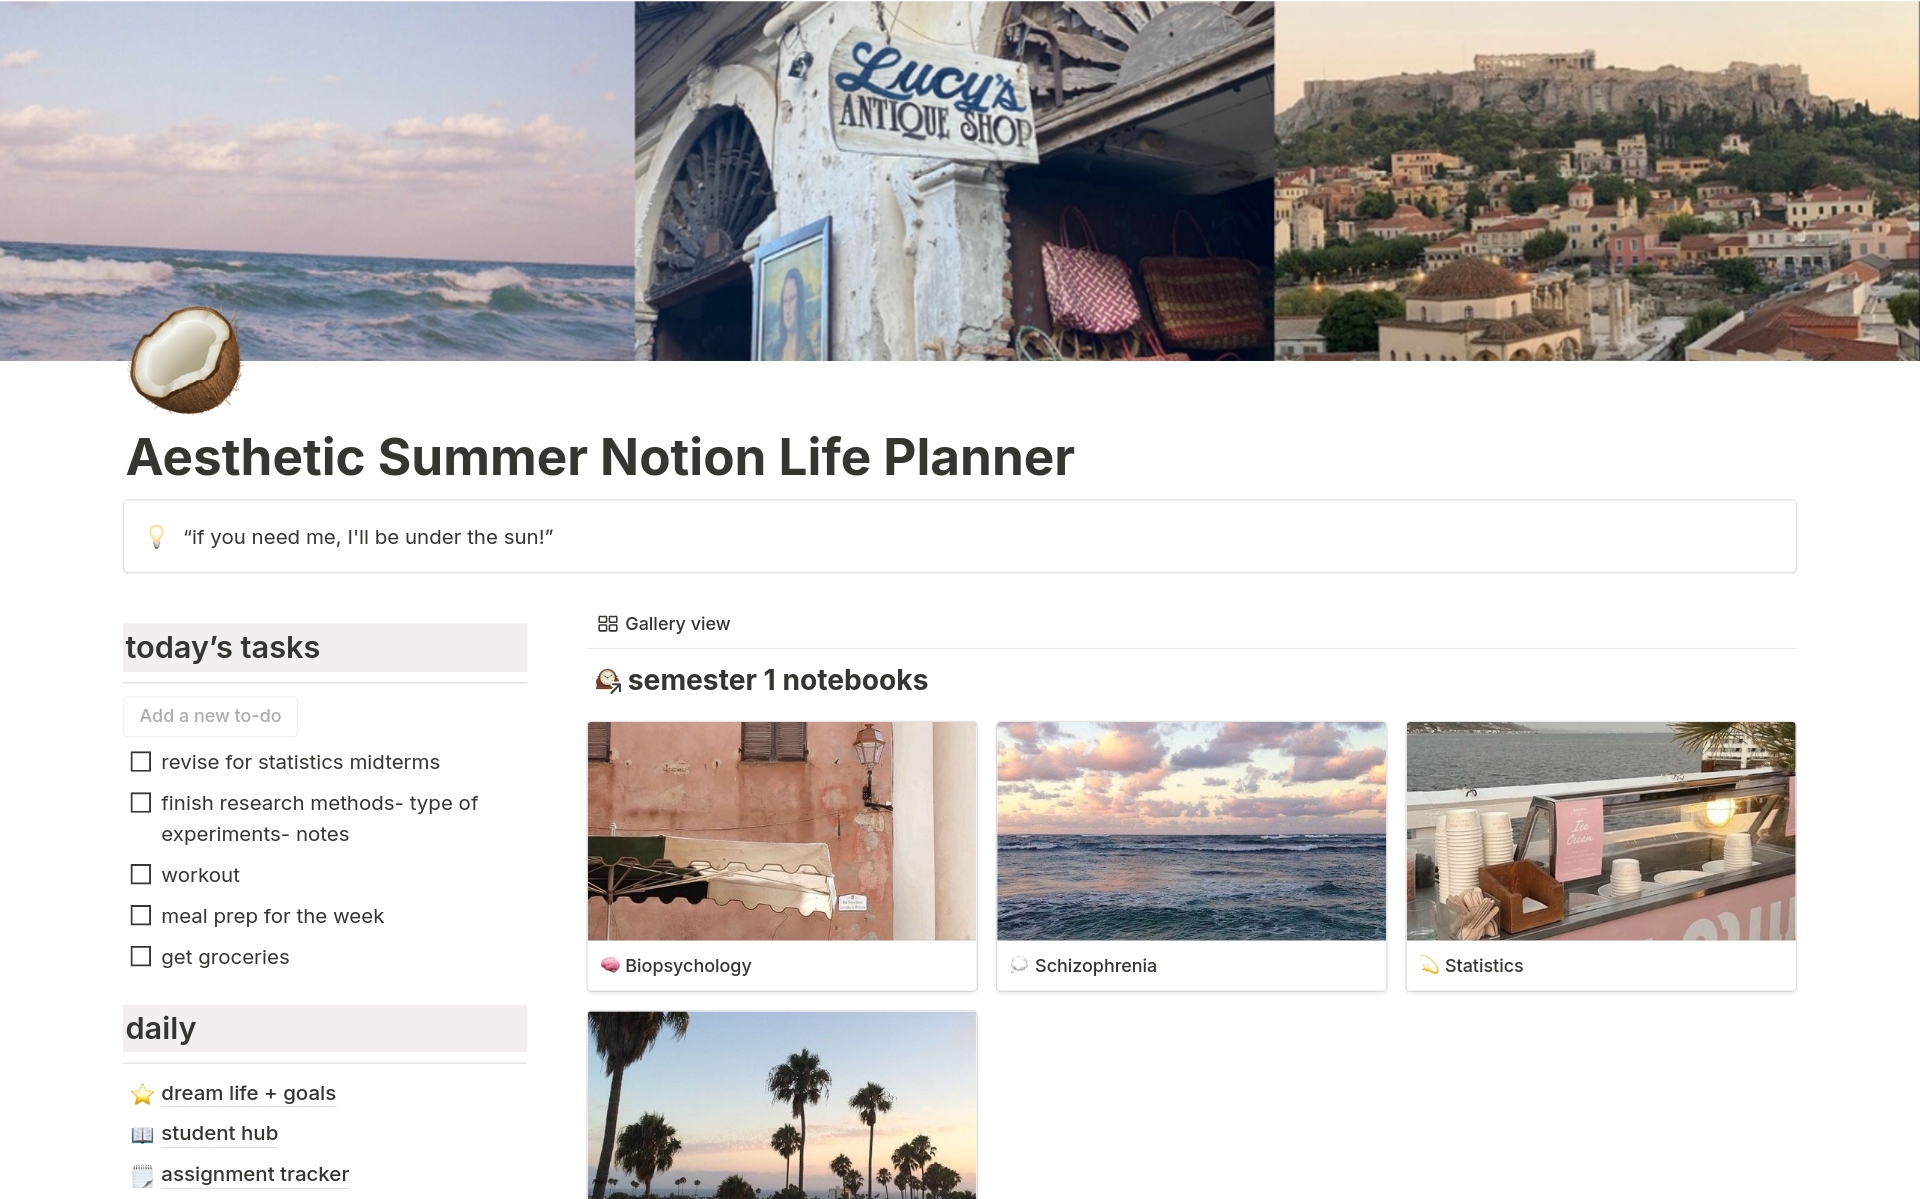 This Aesthetic Summer Life Planner is the perfect space for you to plan up your summer activities and travels + keep on track with school work and developing your personal self!